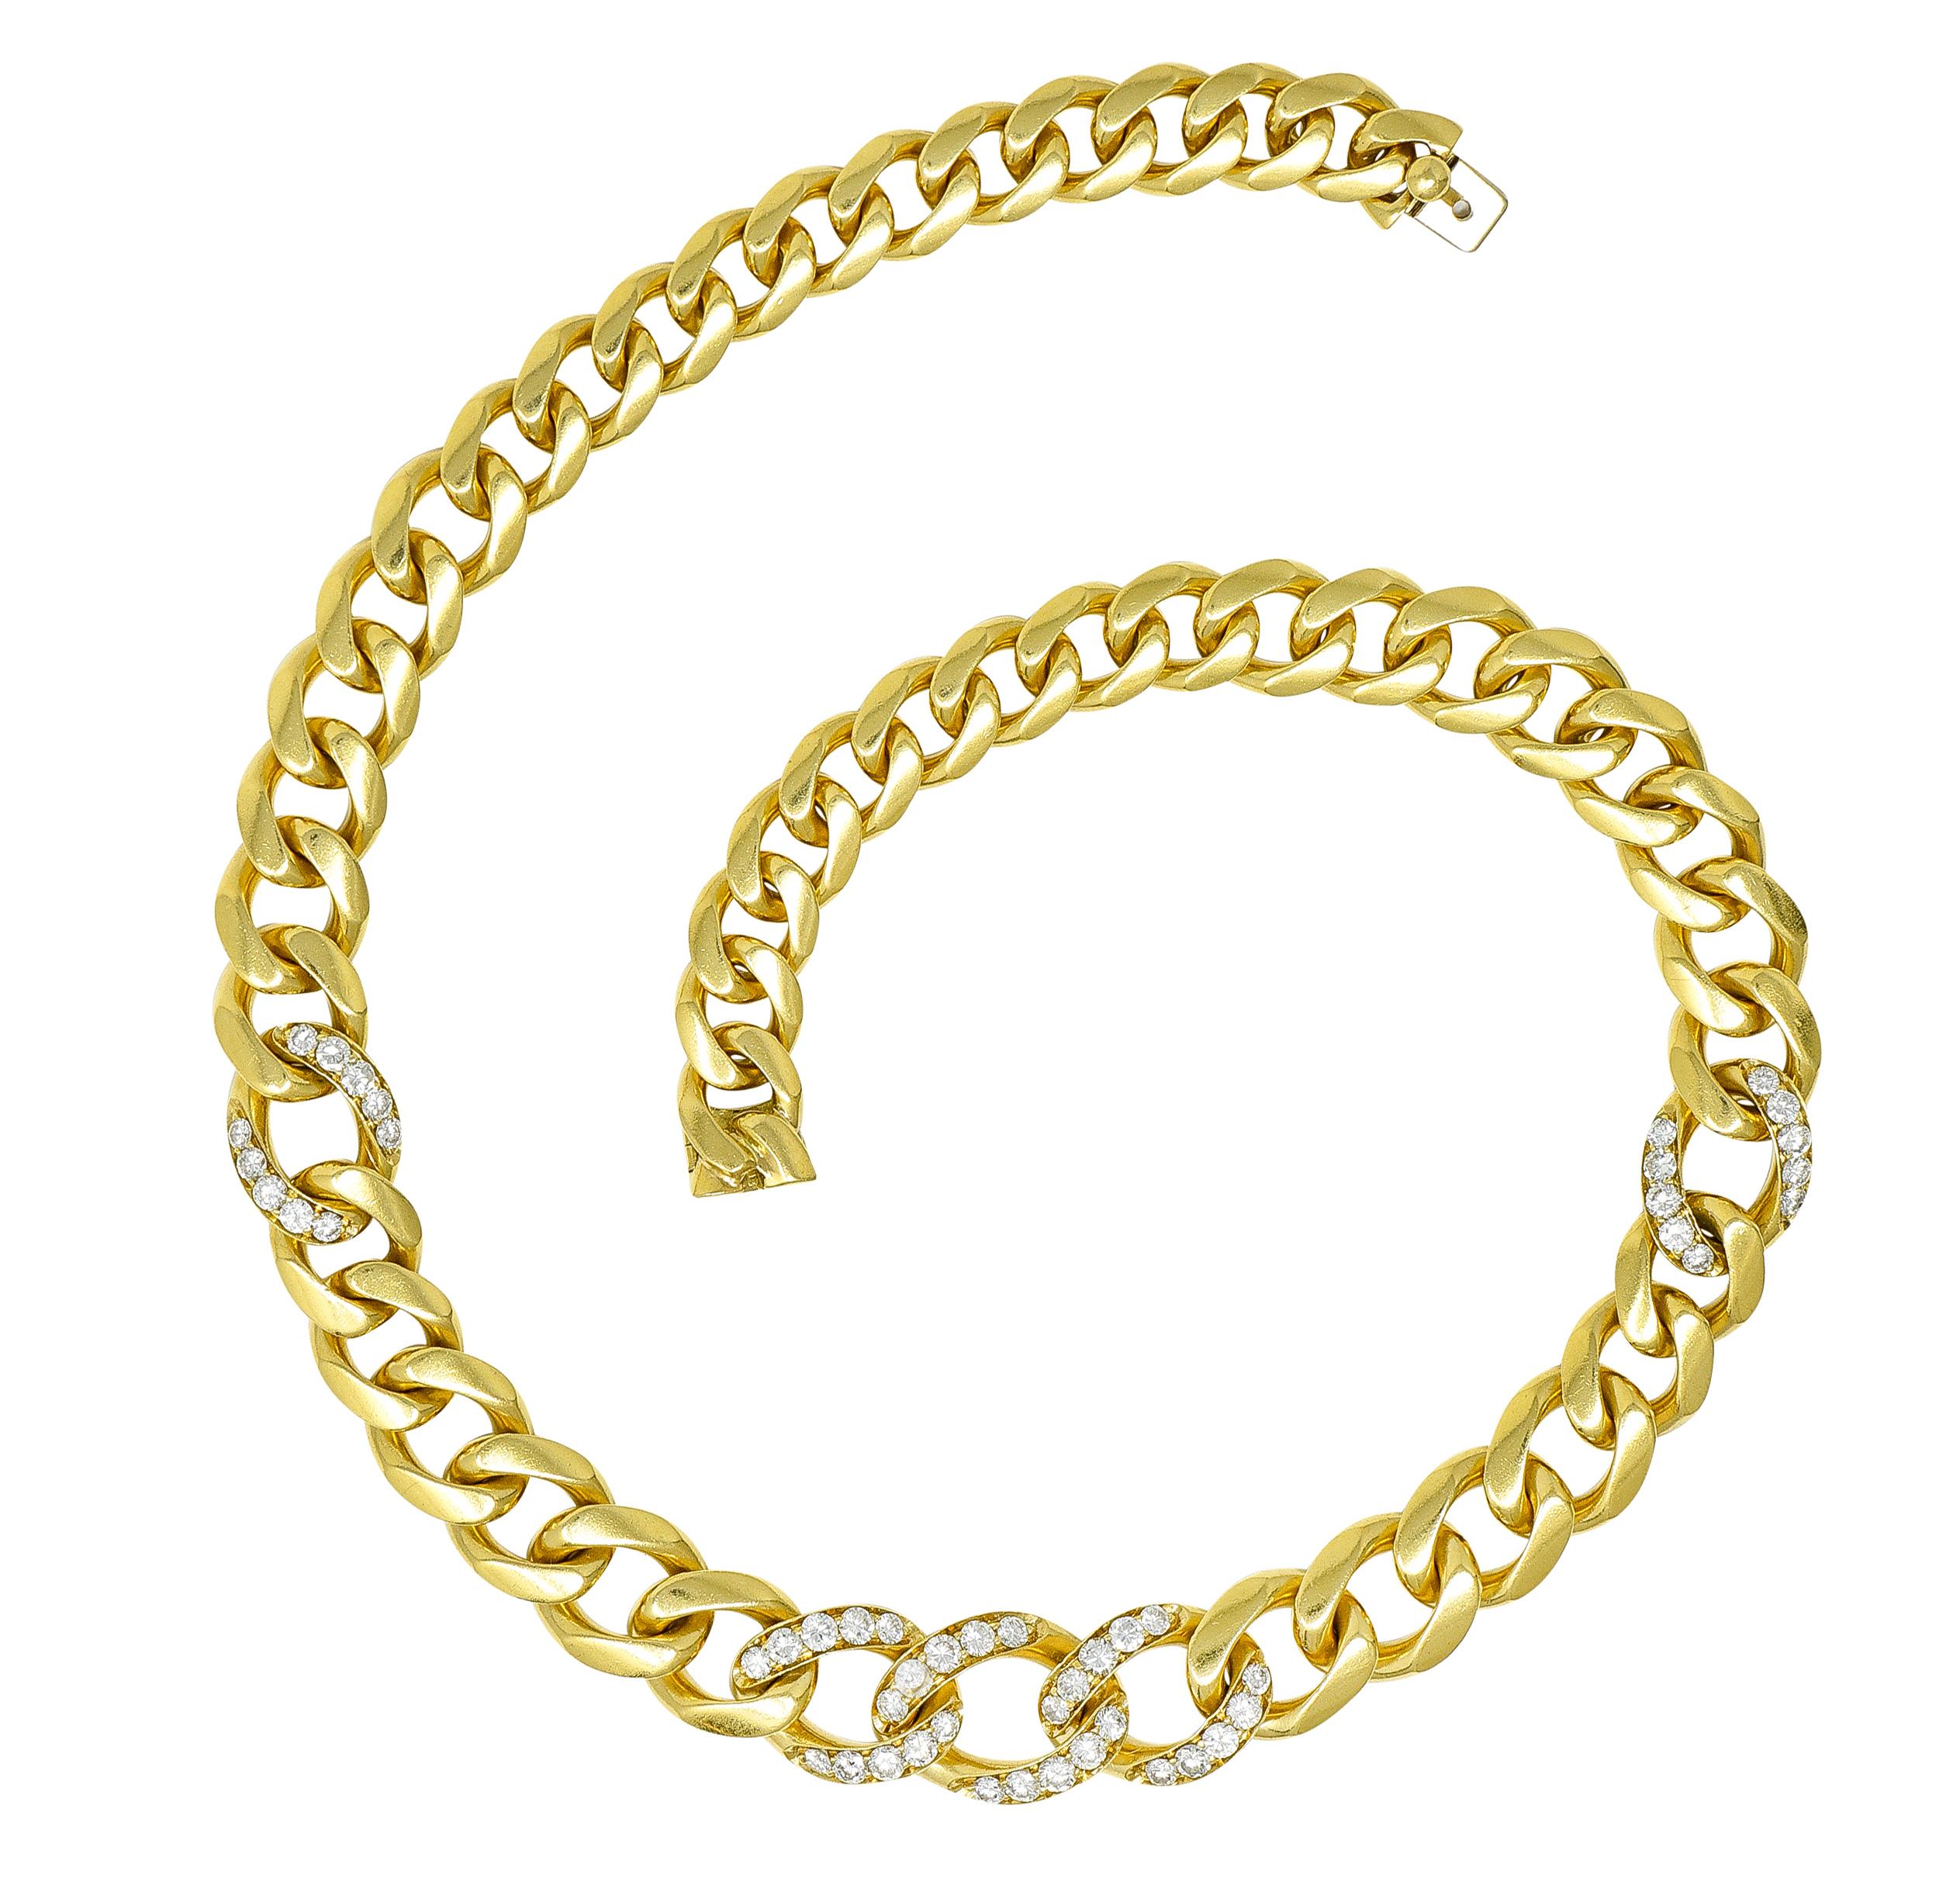 Designed as a graduated curb link chain with bead set diamond link stations 
Round brilliant cut and weighing approximately 3.80 carats
G/H color with VS clarity
Completed by concealed clasp closure 
Stamped for 18 karat gold
Fully signed Bvlgari,